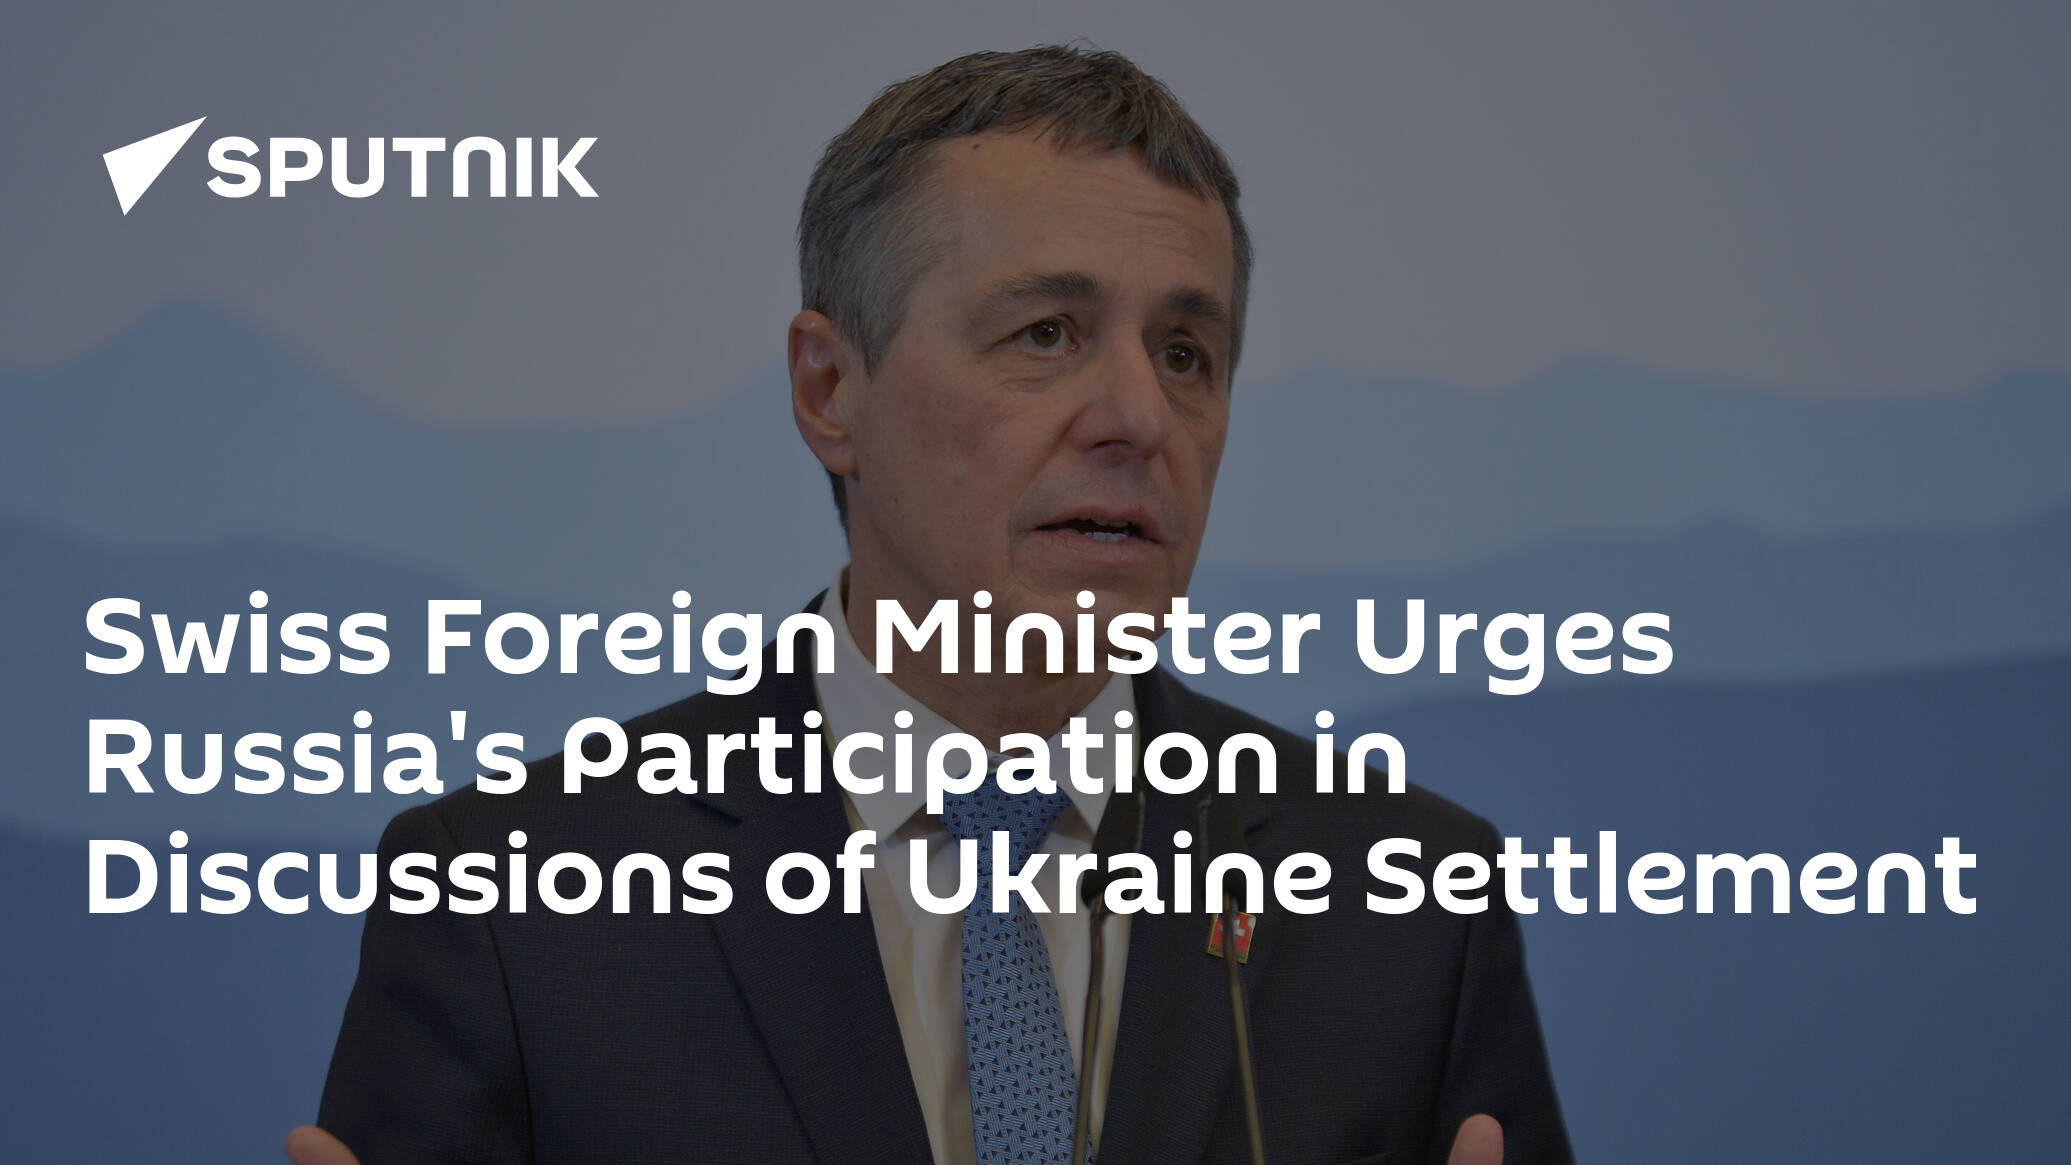 Swiss Foreign Minister Urges Russia's Participation in Discussions of Ukraine Settlement